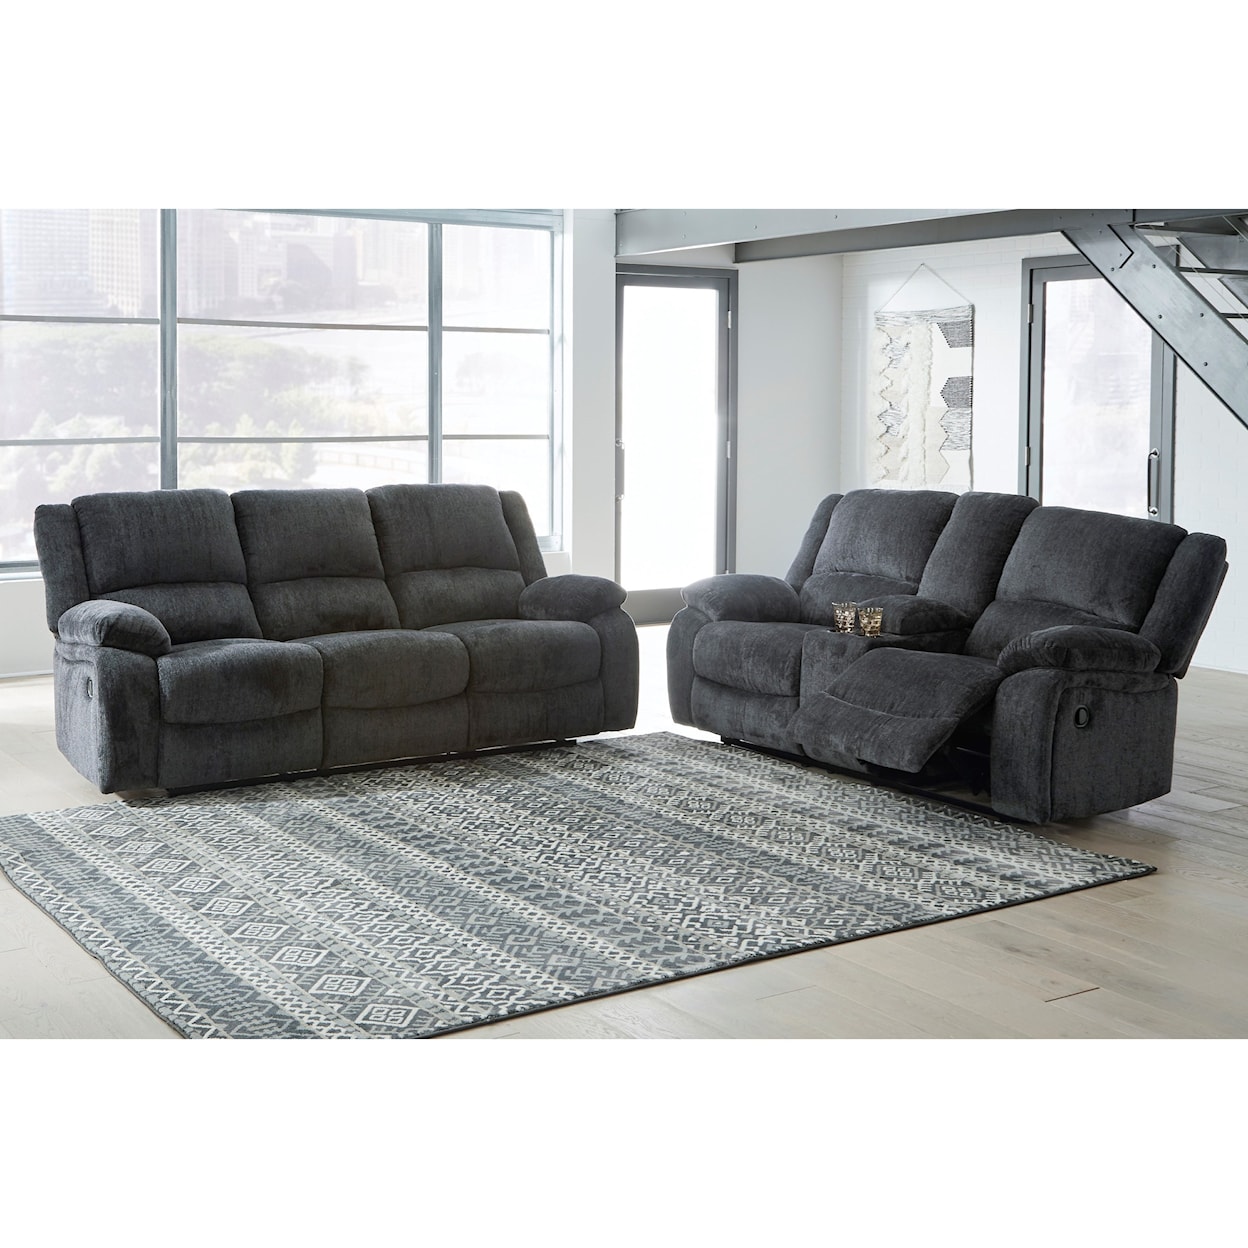 Signature Design by Ashley Furniture Draycoll Reclining Living Room Group